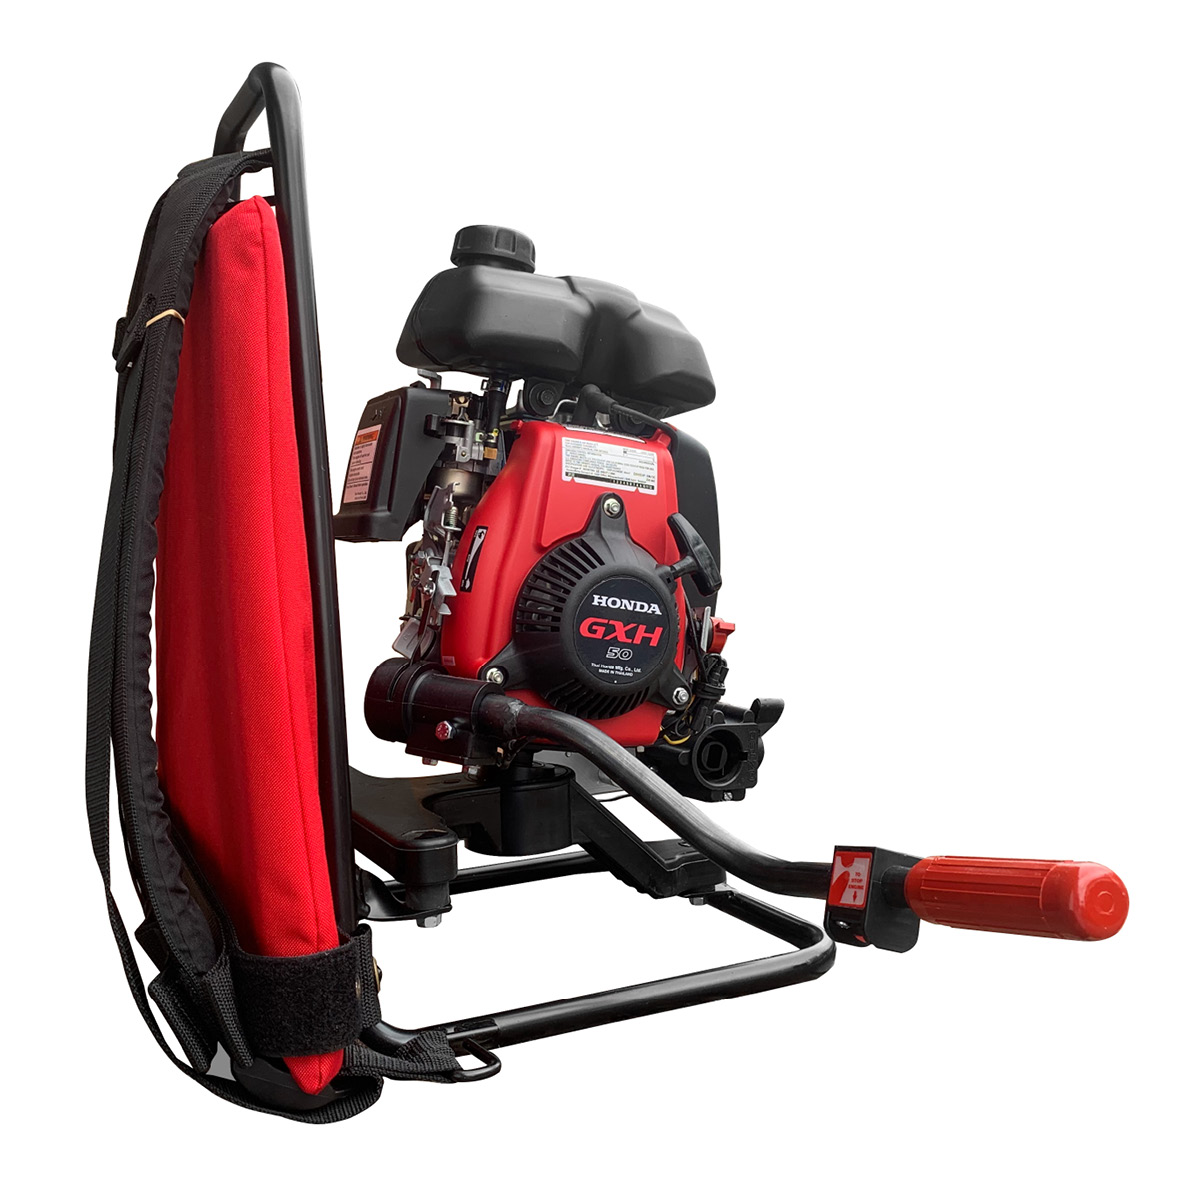 Allen Engineering backpack GXH50 Honda drive unit, available from Speedcrete United Kingdom. This concrete vibratory poker backpack and engine can connect to various vibrator flex lengths and head size combinations.